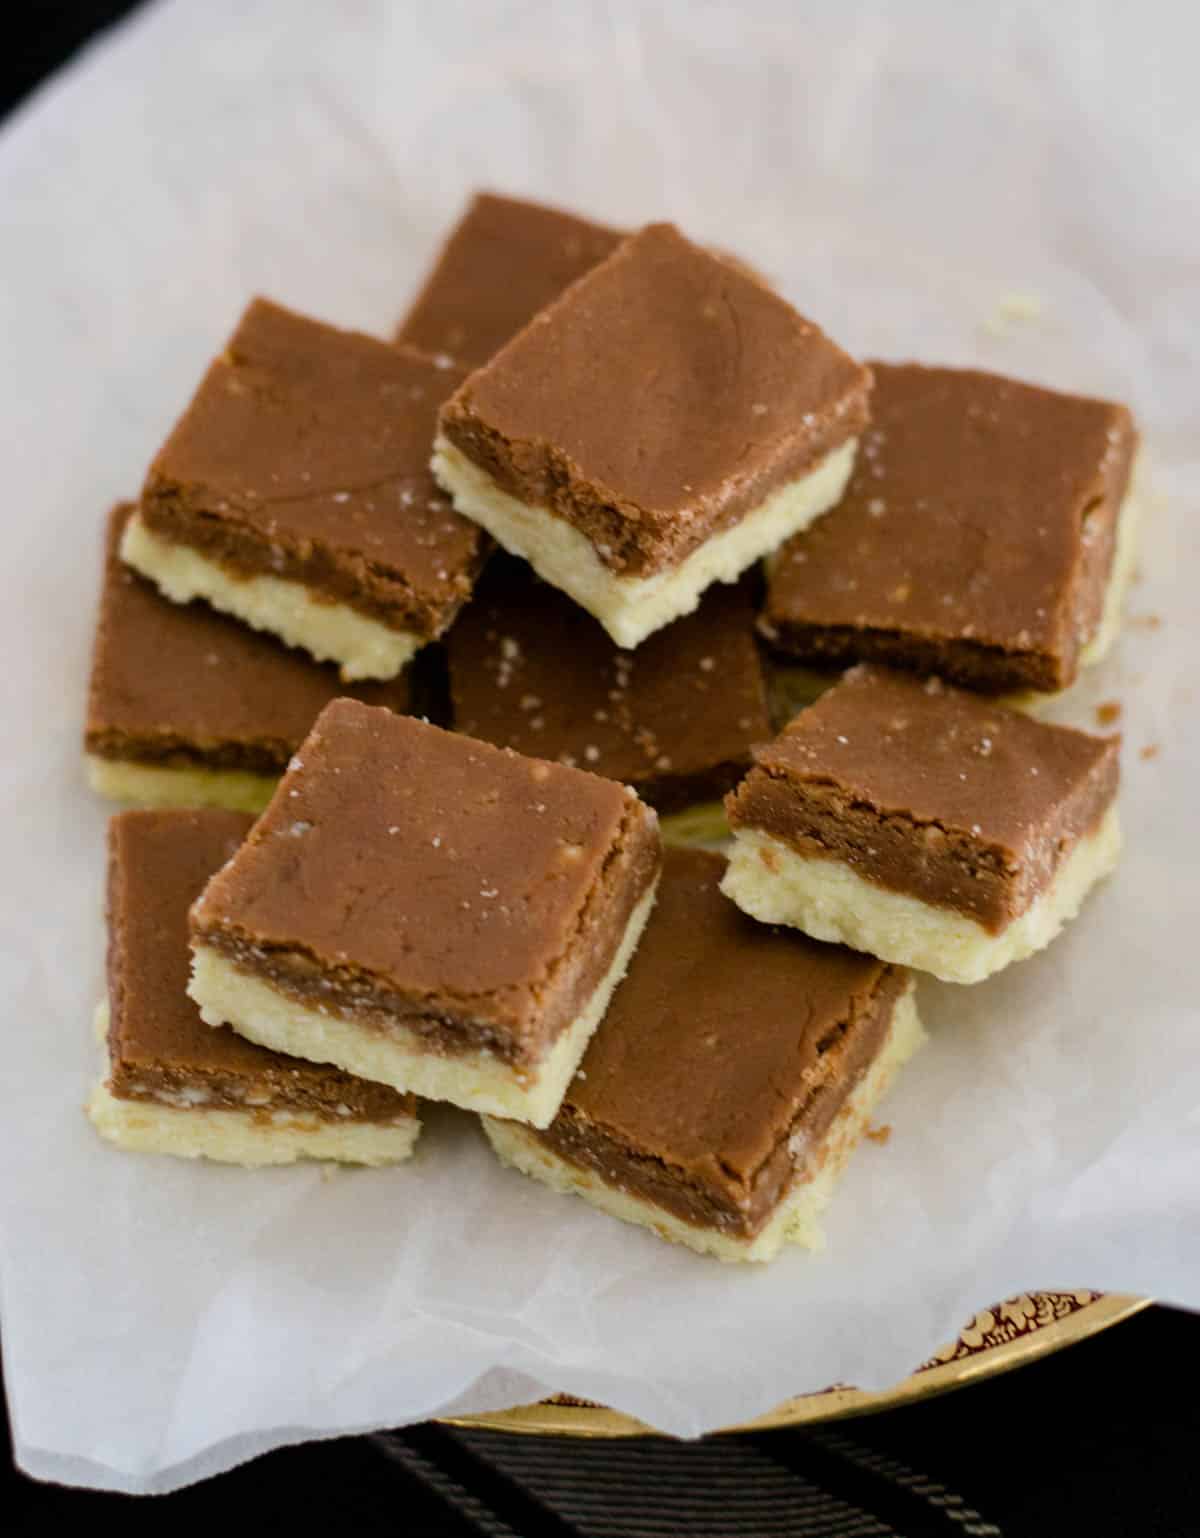 Chocolate barfi pieces stacked on parchment paper